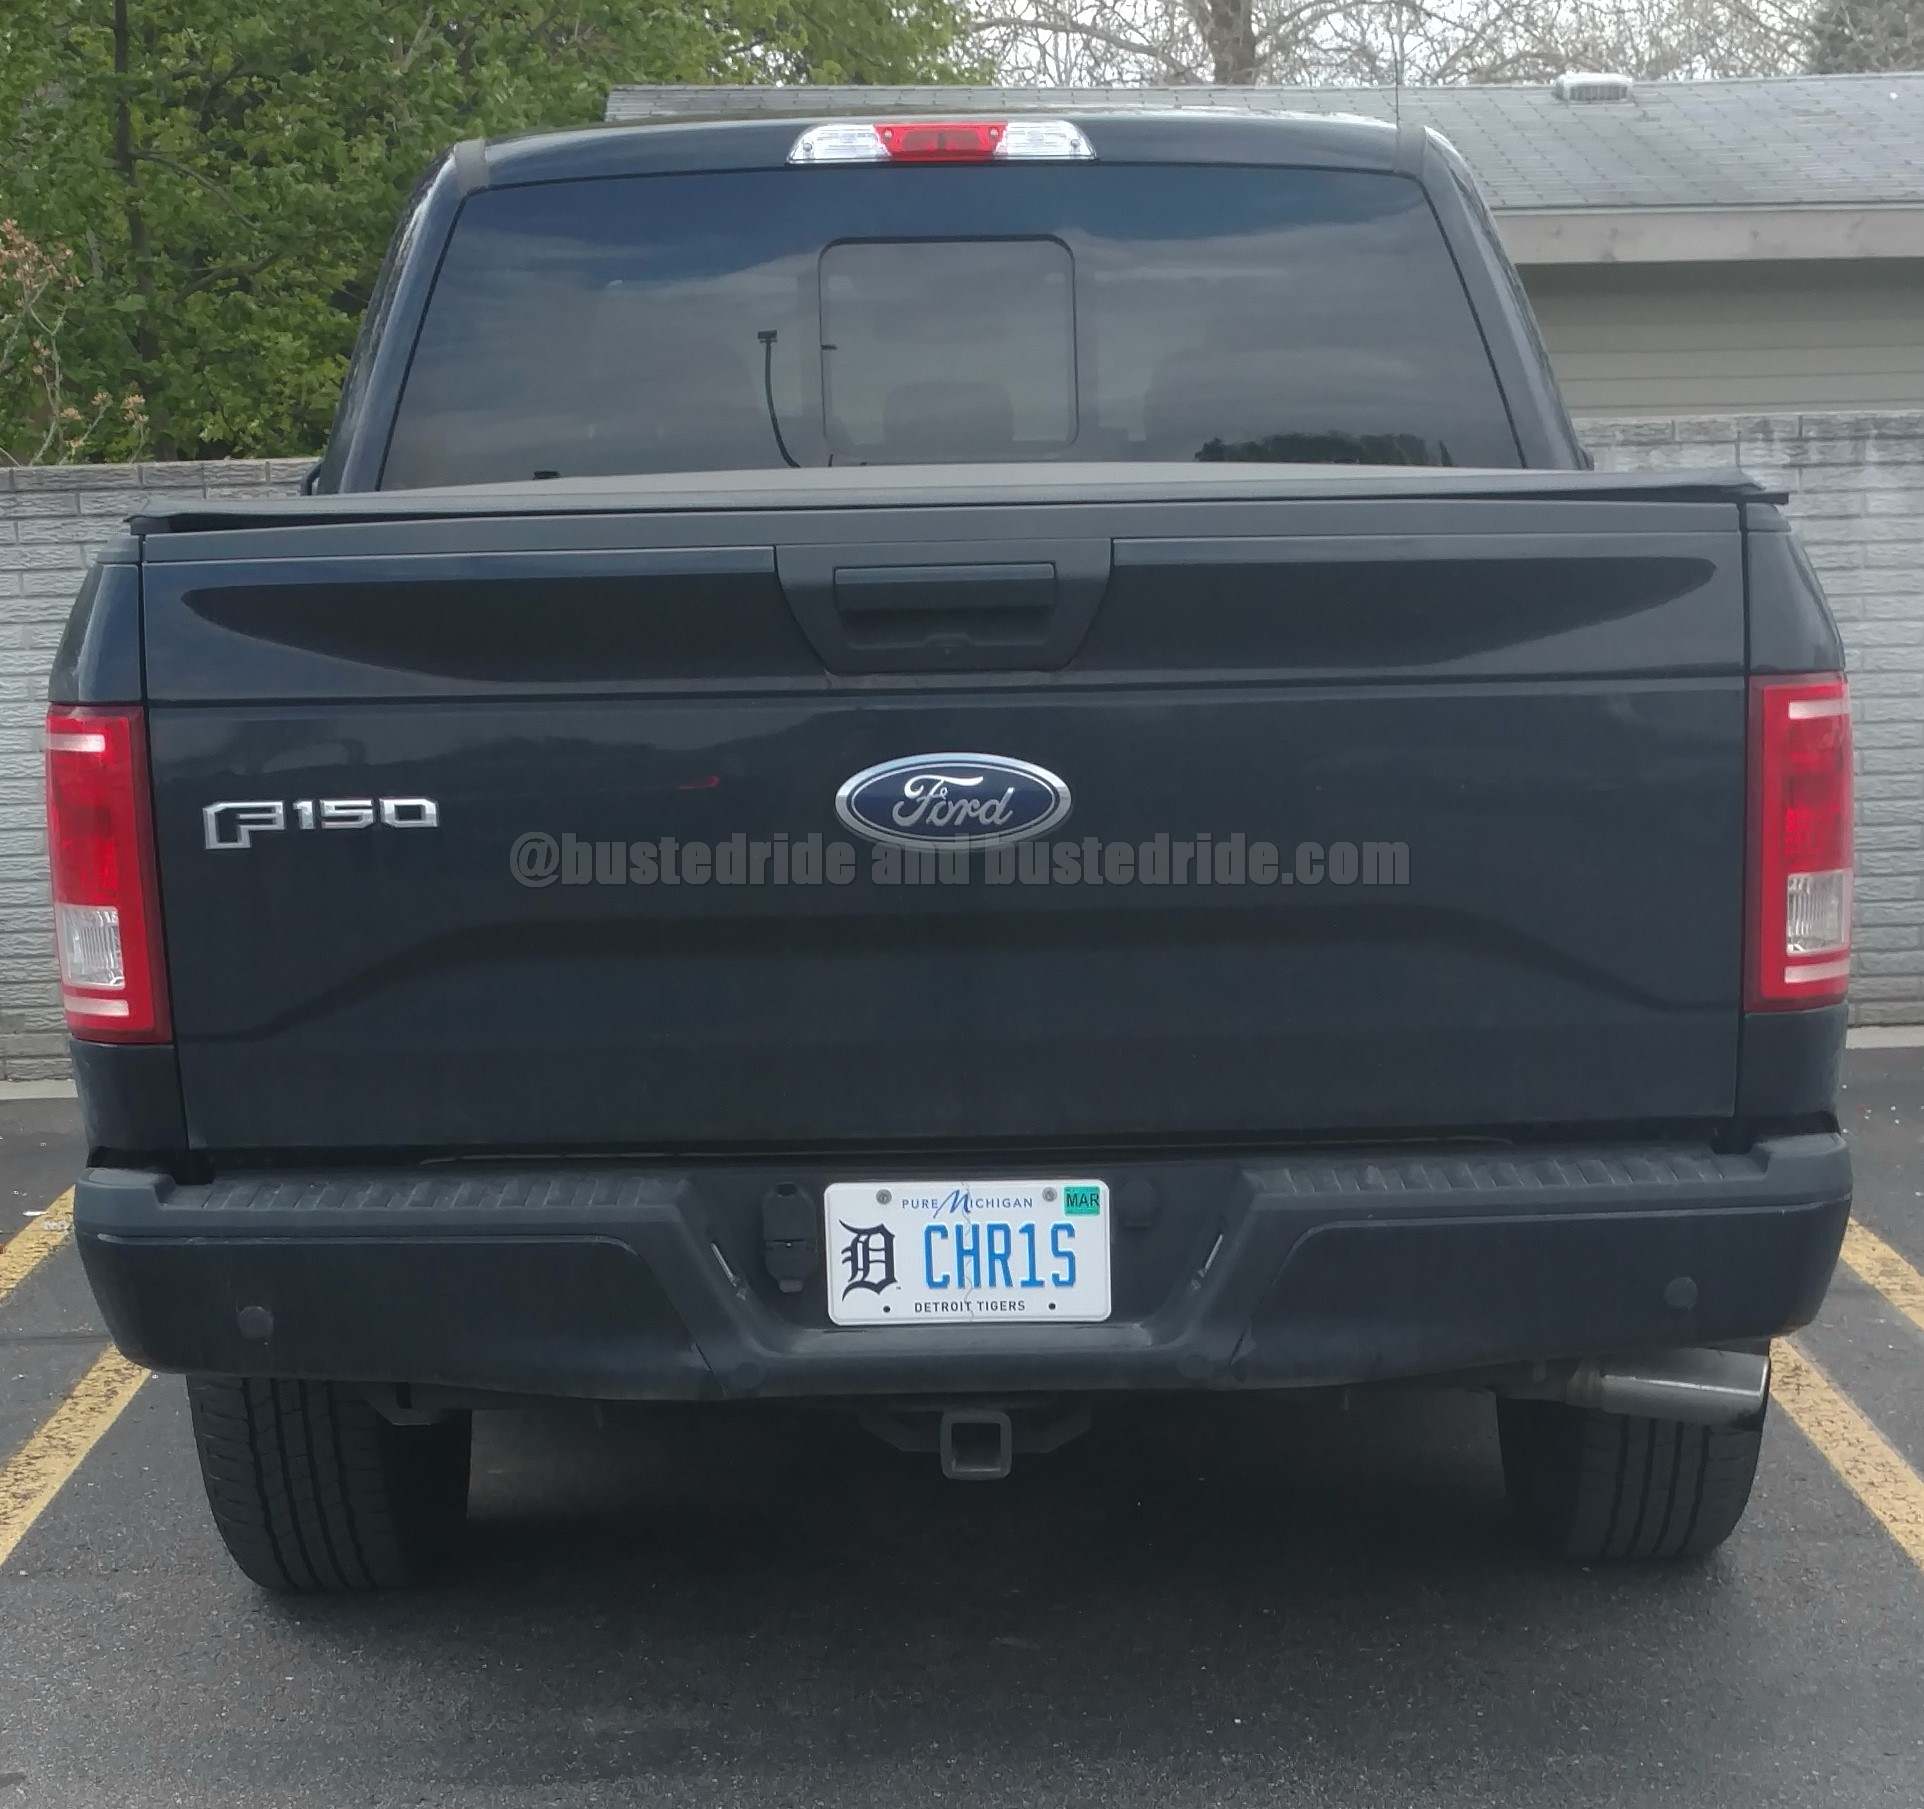 (D) CHR1S - Vanity License Plate by Busted Ride